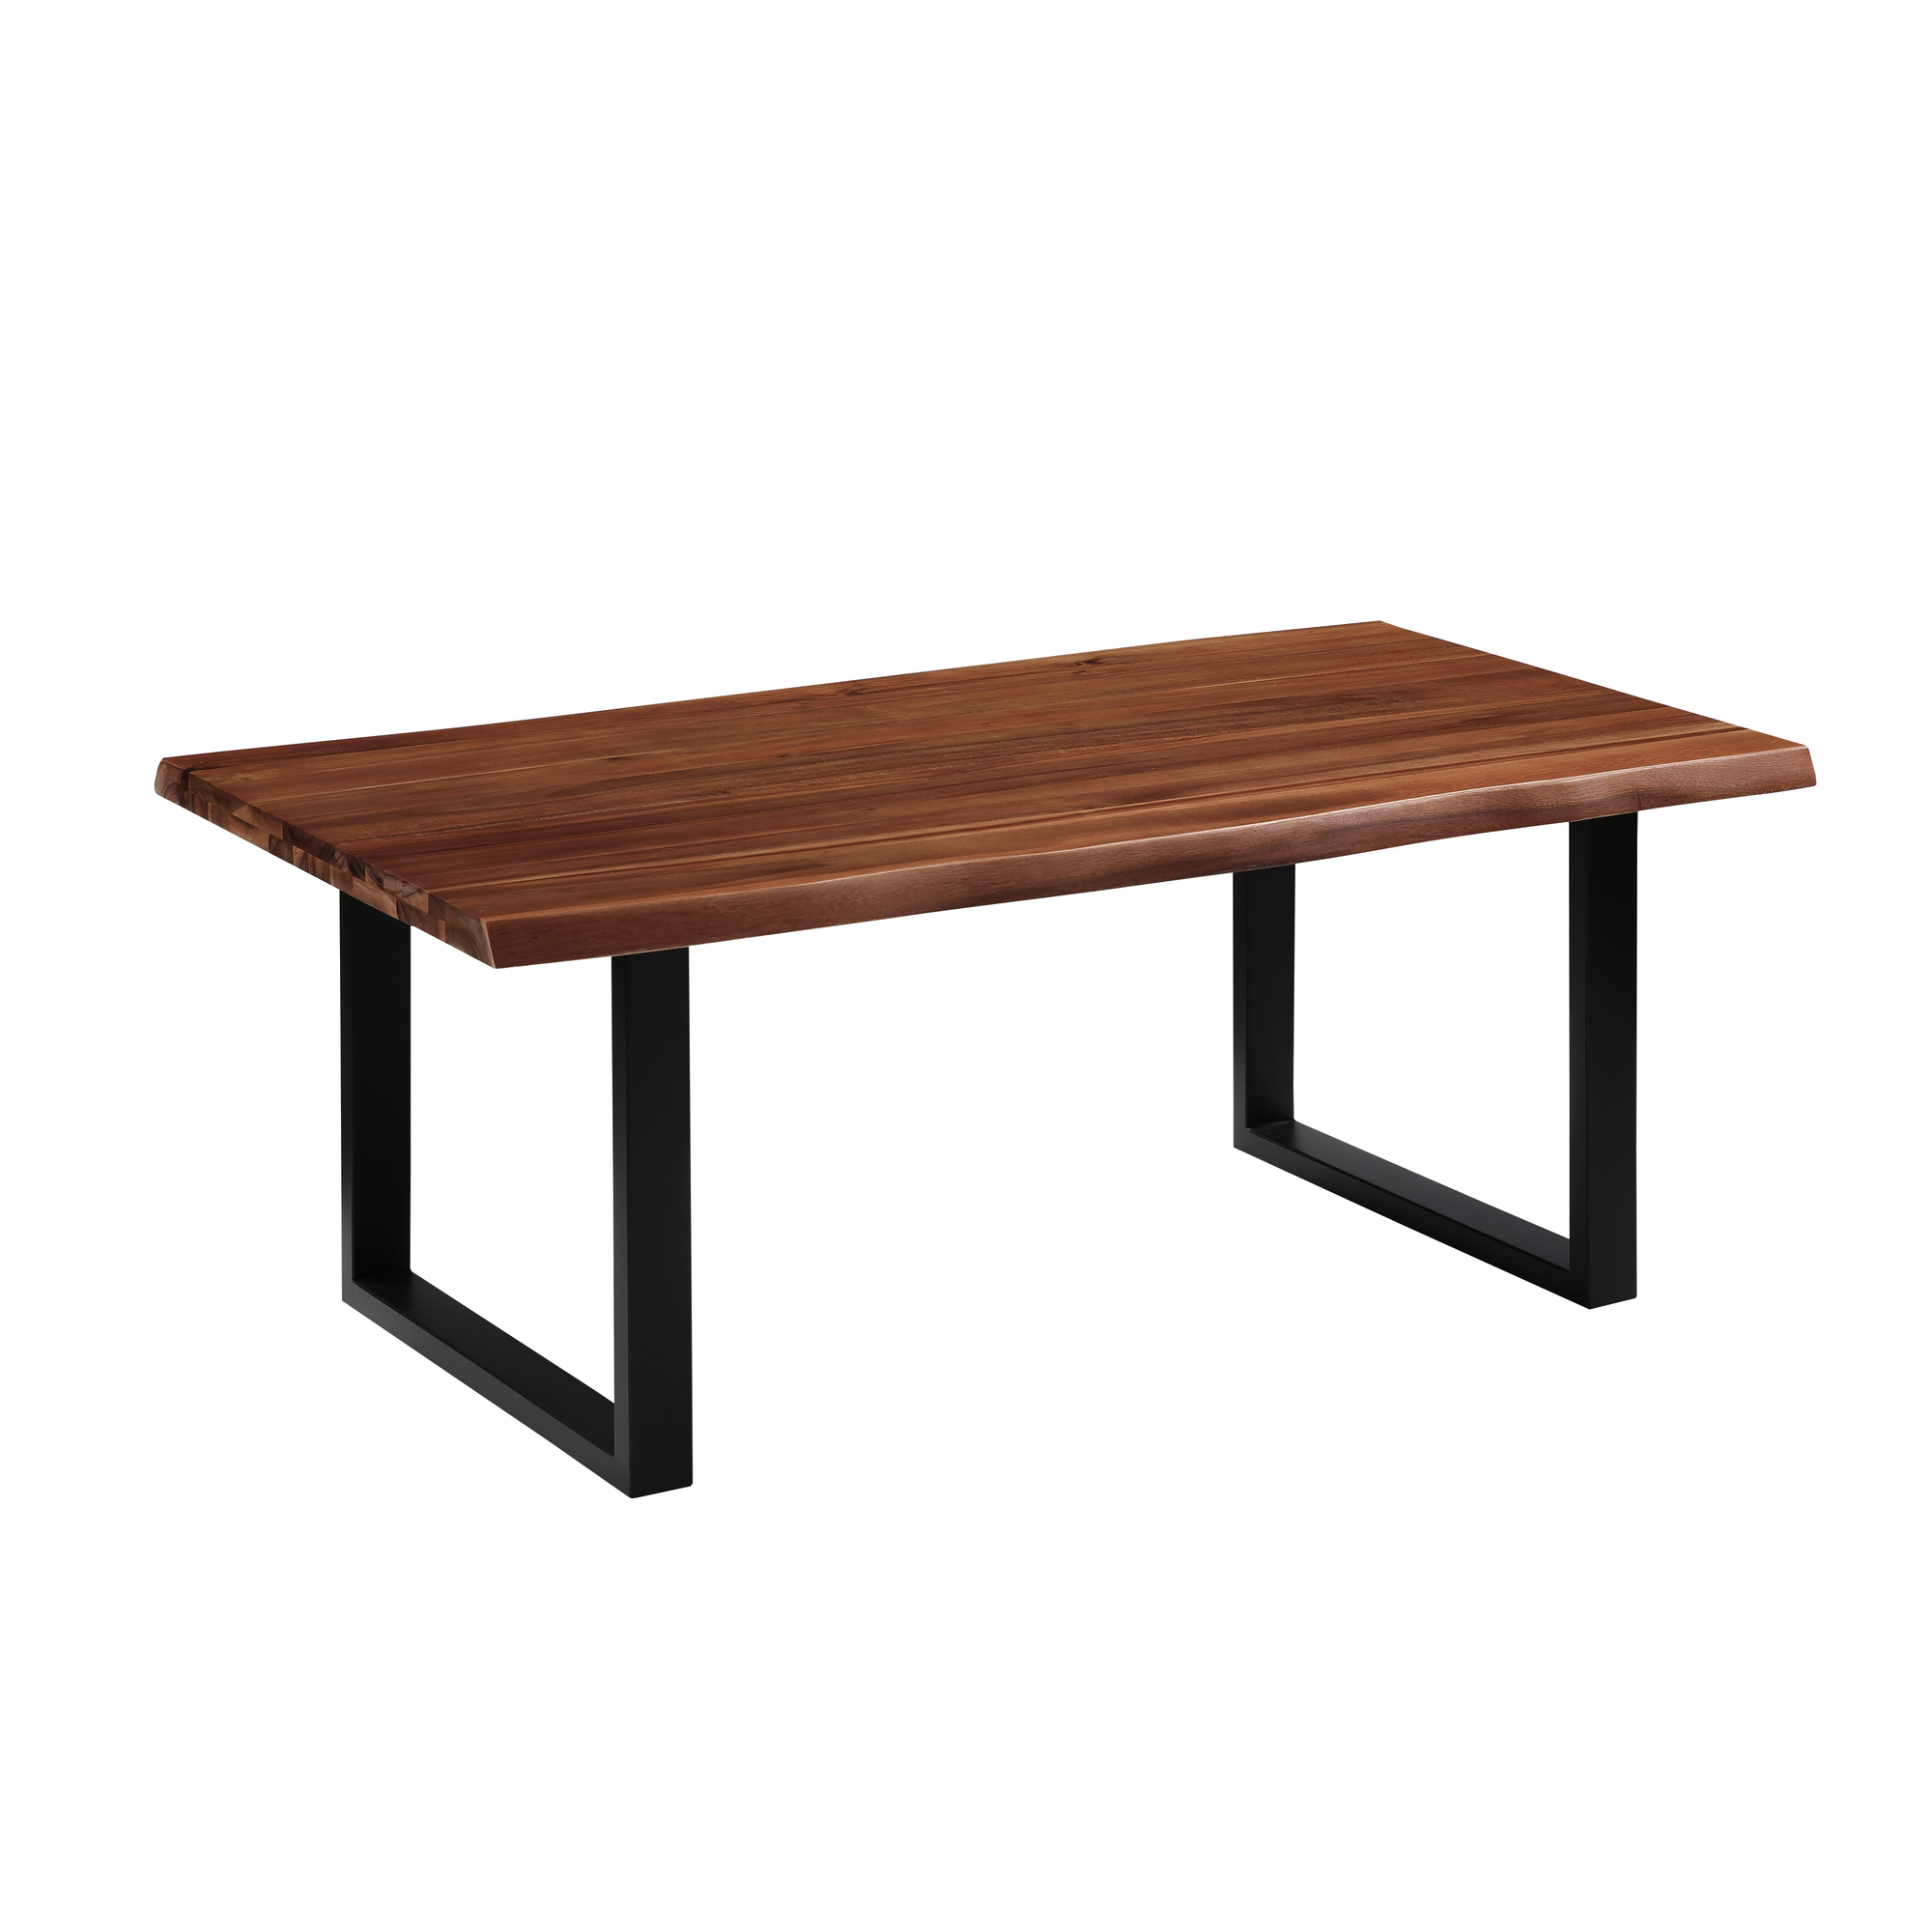 Merry Products, Oregon Live Edge Coffee Table, Height 17 in, Width 24 in, Length 44 in, Model TBT0261100800